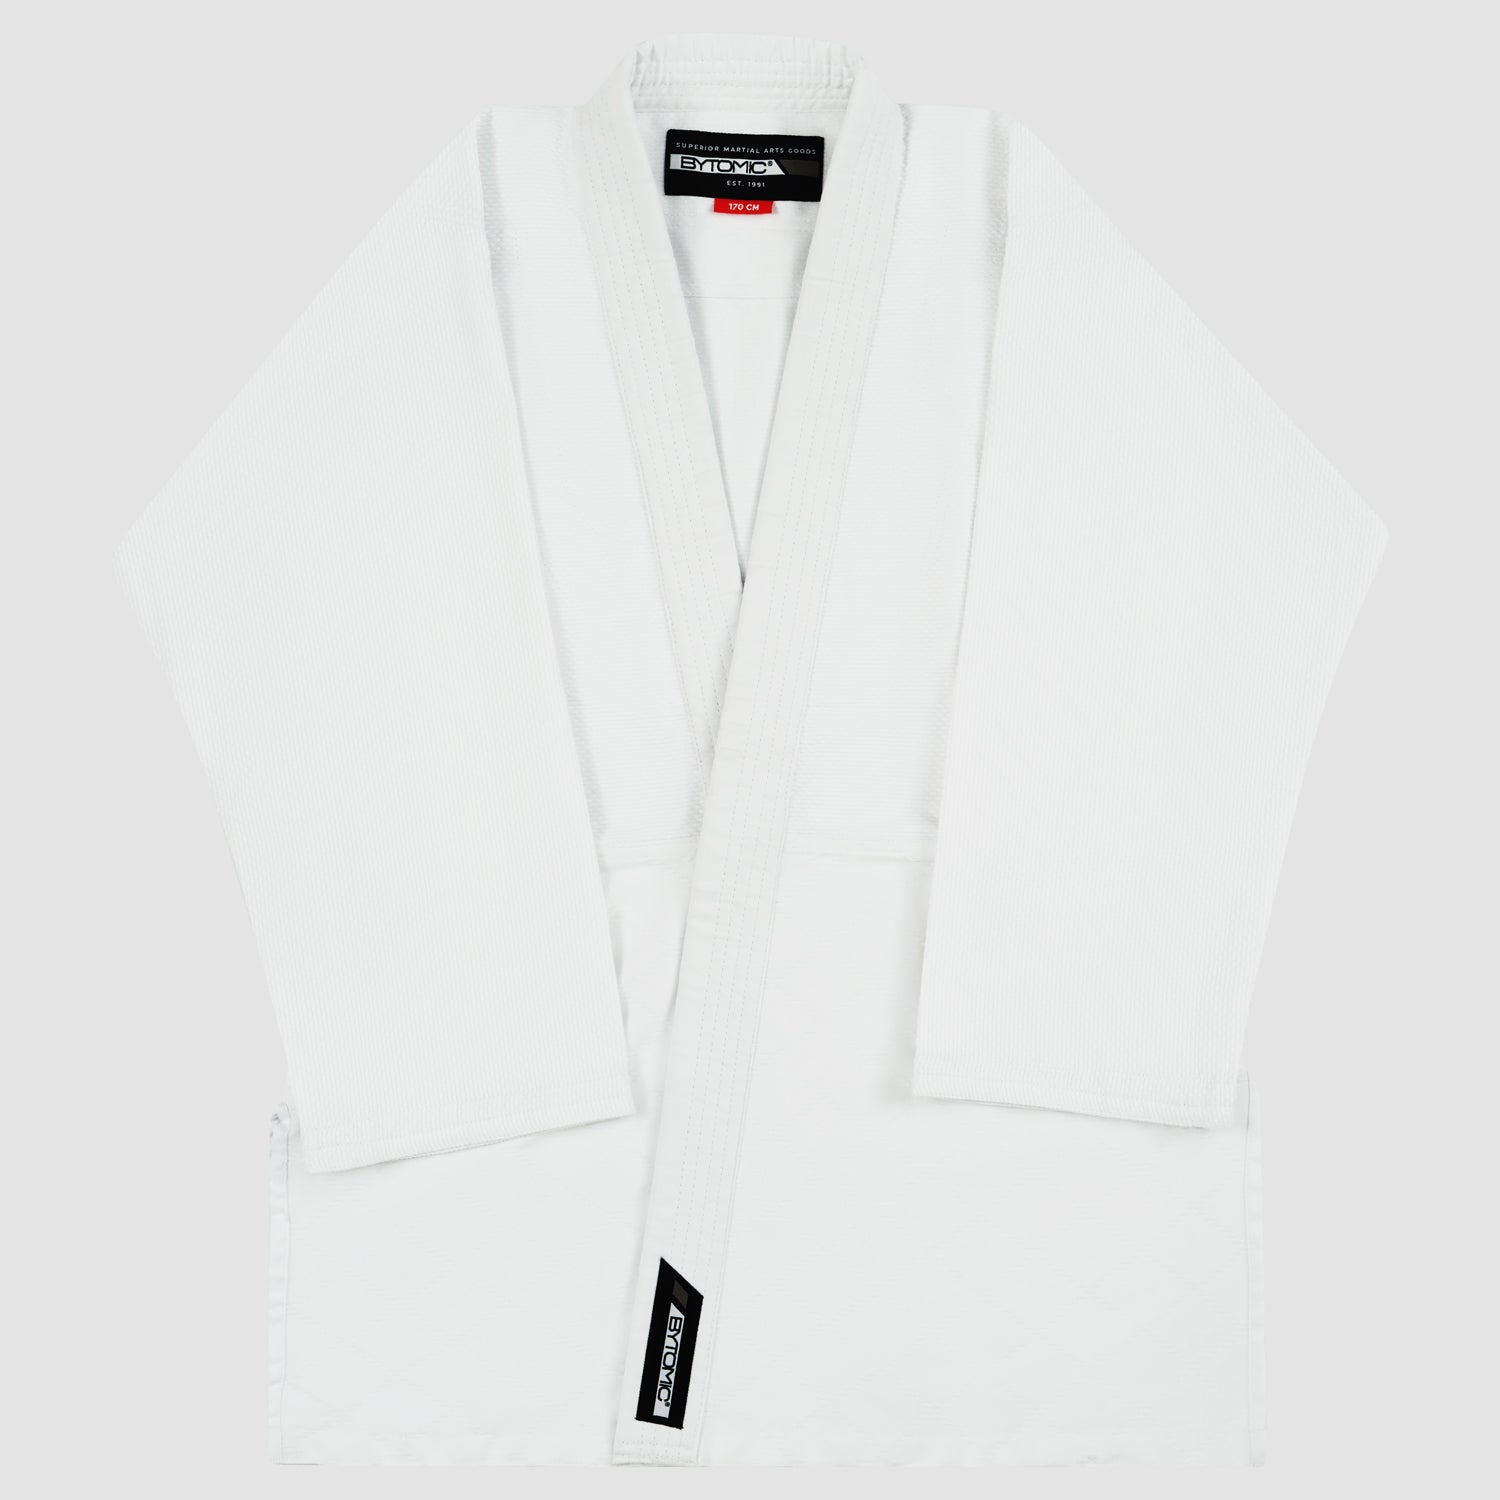 White Bytomic Red Label Adult Judo Uniform 7200 Fight Co